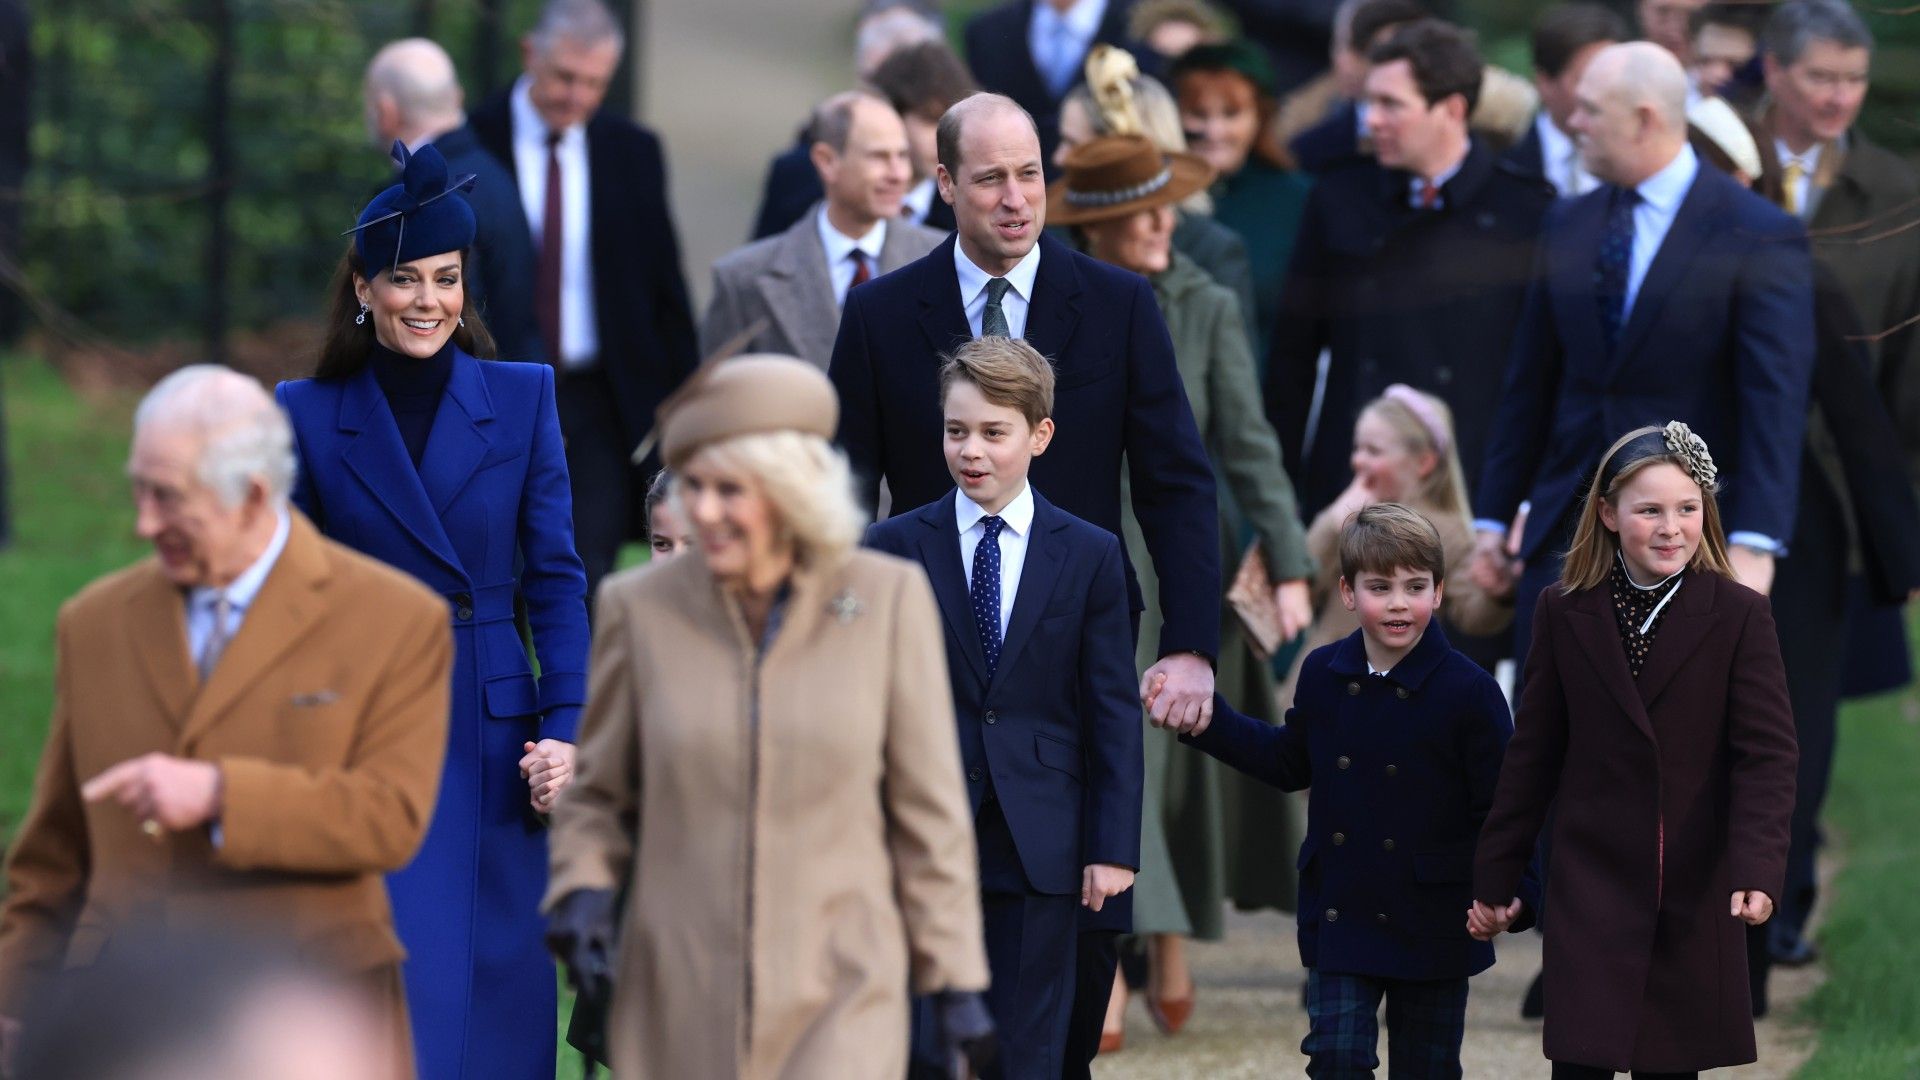 <p>                     As is tradition in many families around the world, the royals make a point to attend church on December 25th, with almost all of the royal family visiting the 11 am service.                   </p>                                      <p>                     The royals usually spend Christmas on the Sandringham Estate, so the family traditionally head to the local St Mary Magdalene Church, which is just a stone’s throw from Sandringham House. And it’s an important tradition for the family, given that the reigning monarch holds the important title of Defender of the Faith, and Supreme Governor of the Church of England.                   </p>                                      <p>                     Before the church service, the royals are often greeted by adoring royal fans, who line the walk to the church to meet the family.                   </p>